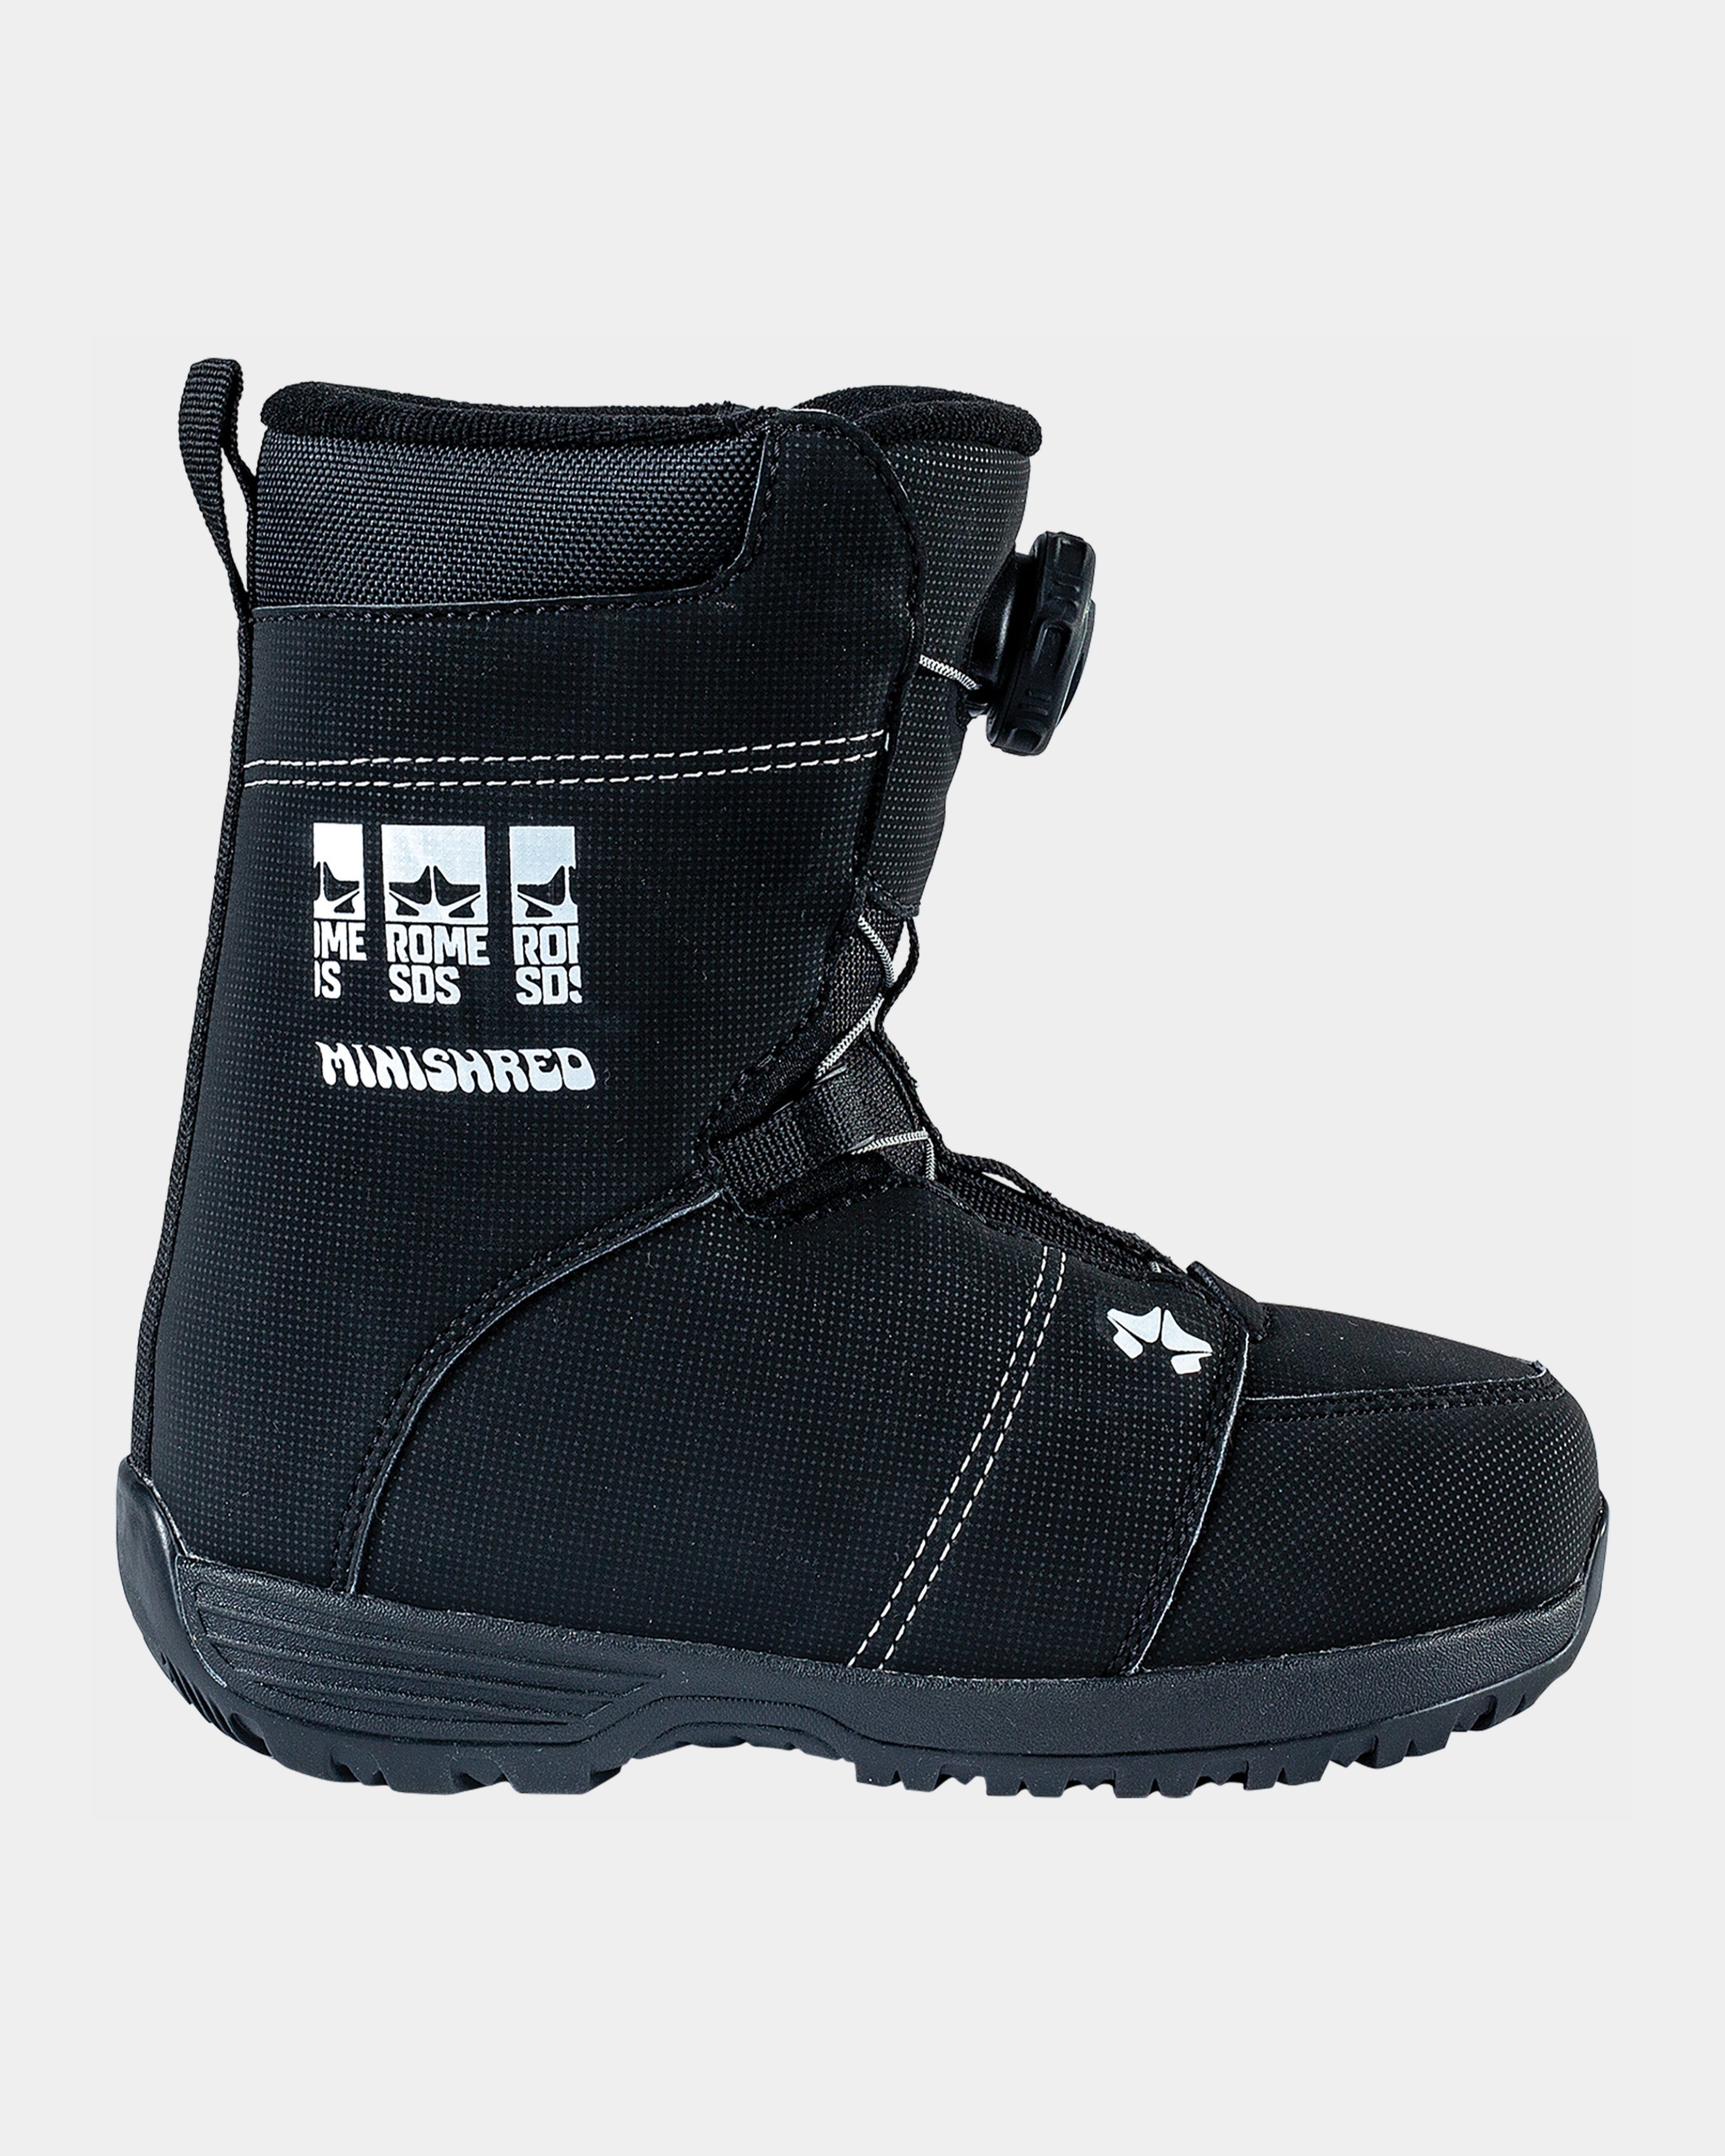 Rome Snowboard Boots – Rome SDS US